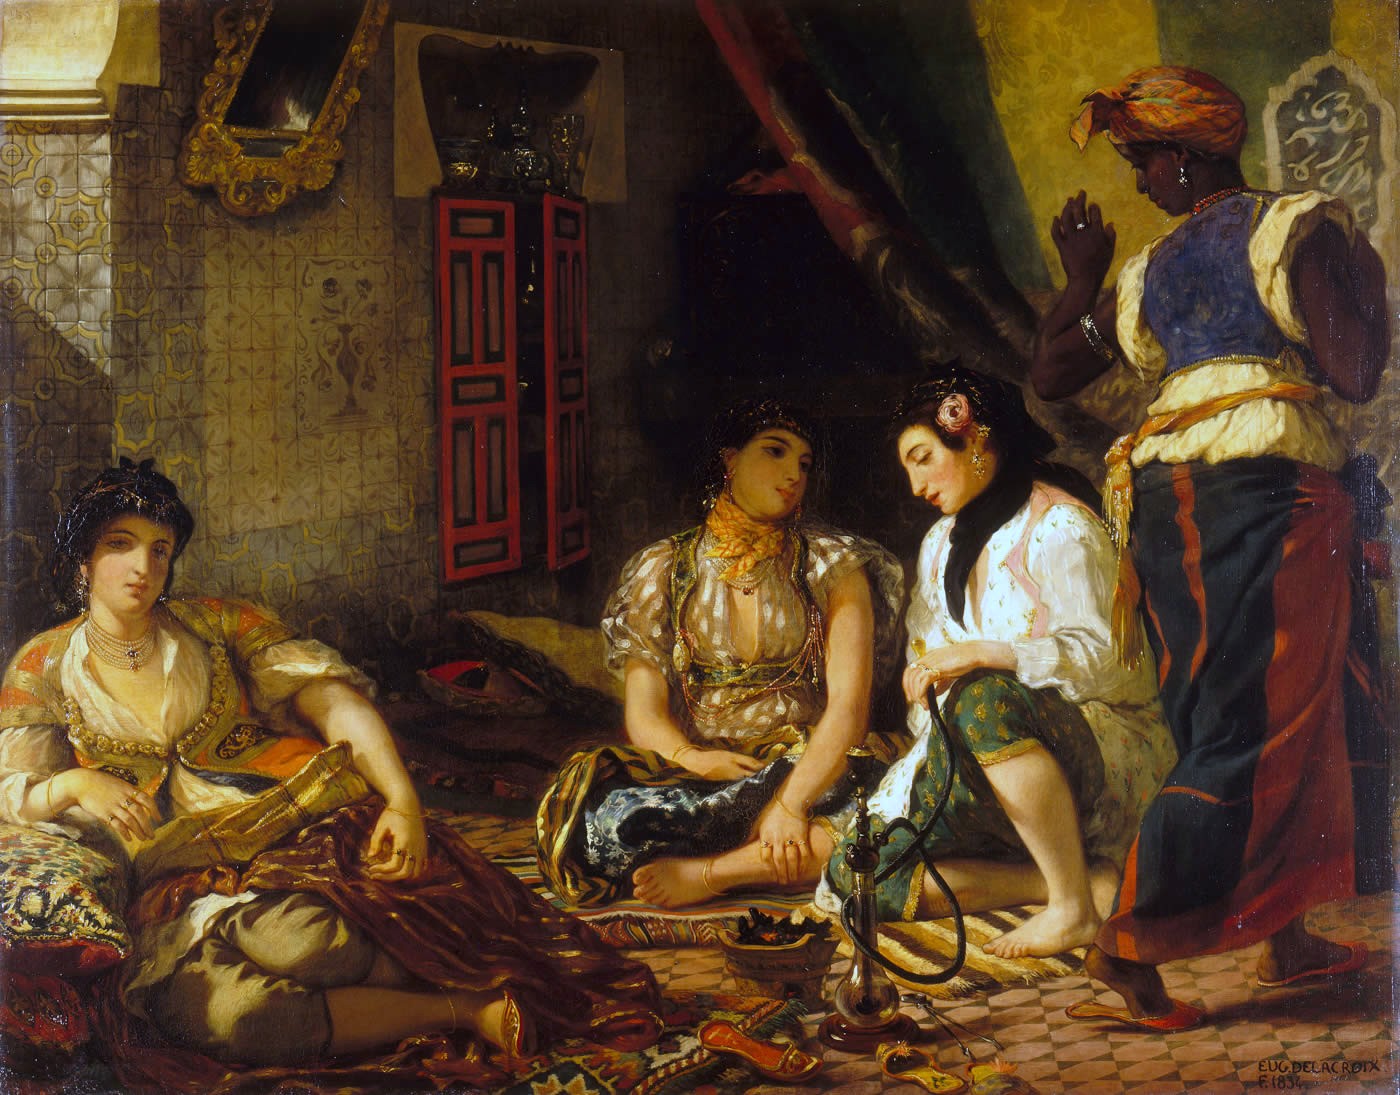 Three woman sitting on the floor while one woman is standing waiting on the others